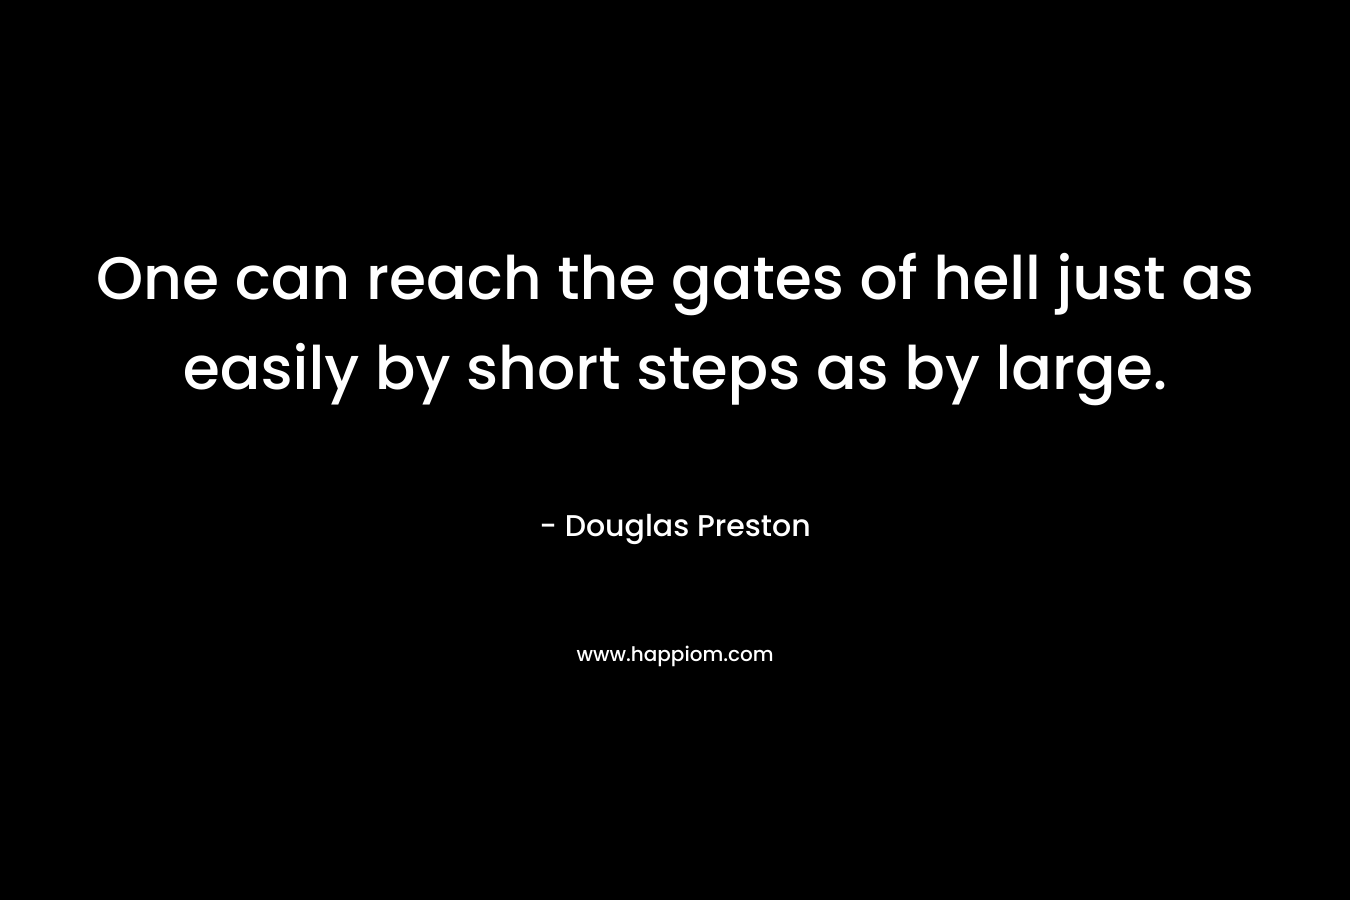 One can reach the gates of hell just as easily by short steps as by large. – Douglas Preston